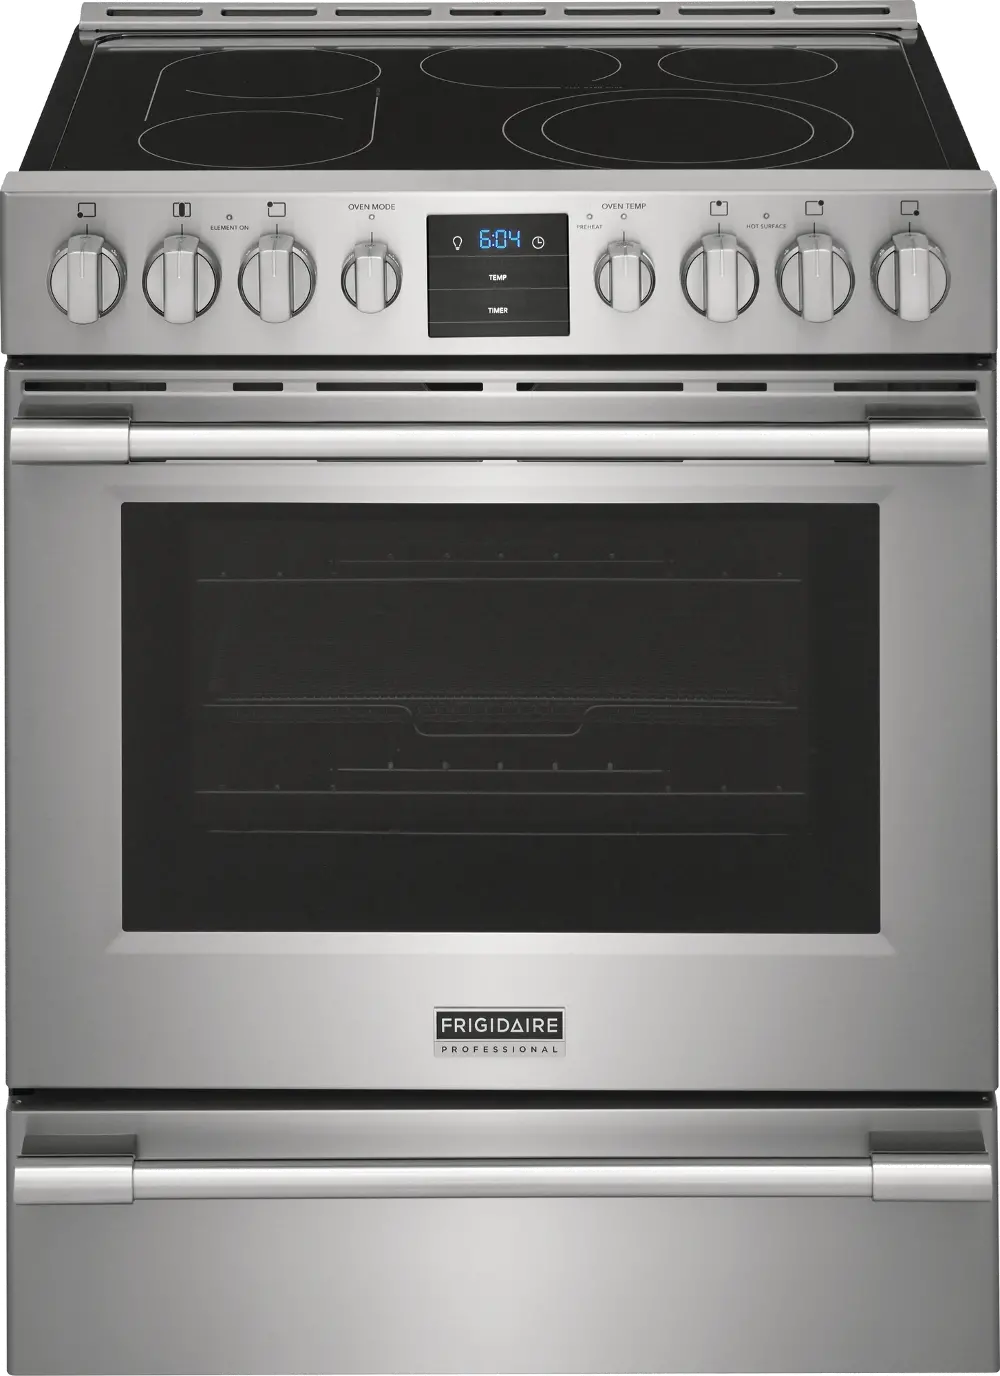 PCFE3078AF Frigidaire Professional 5.4 cu ft Electric Range - Stainless Steel-1